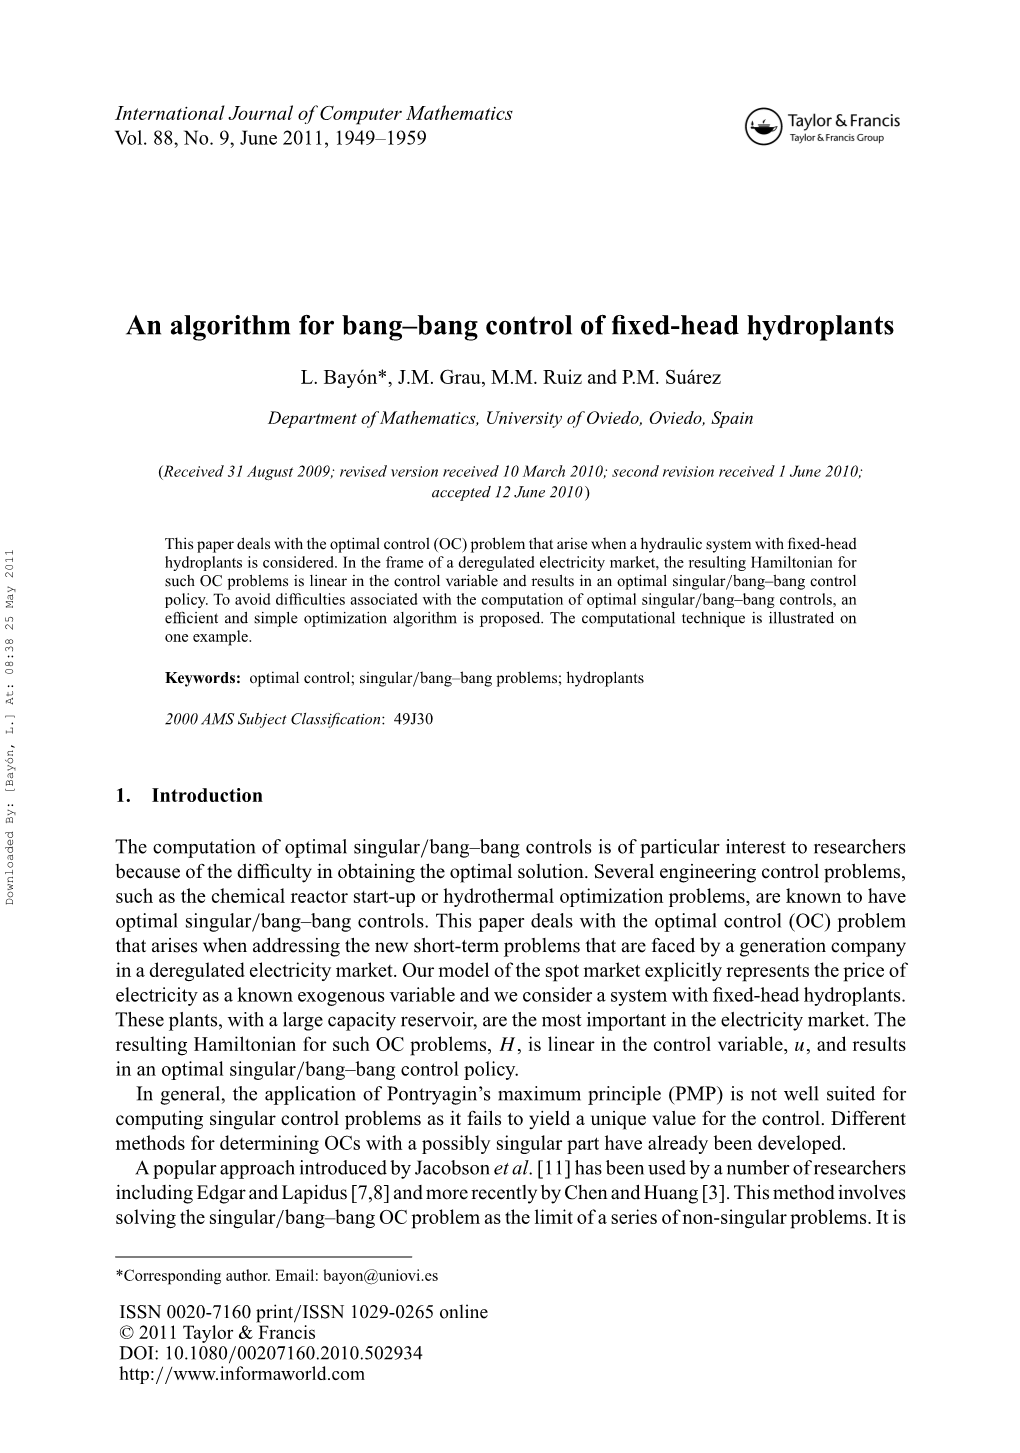 An Algorithm for Bang–Bang Control of Fixed-Head Hydroplants